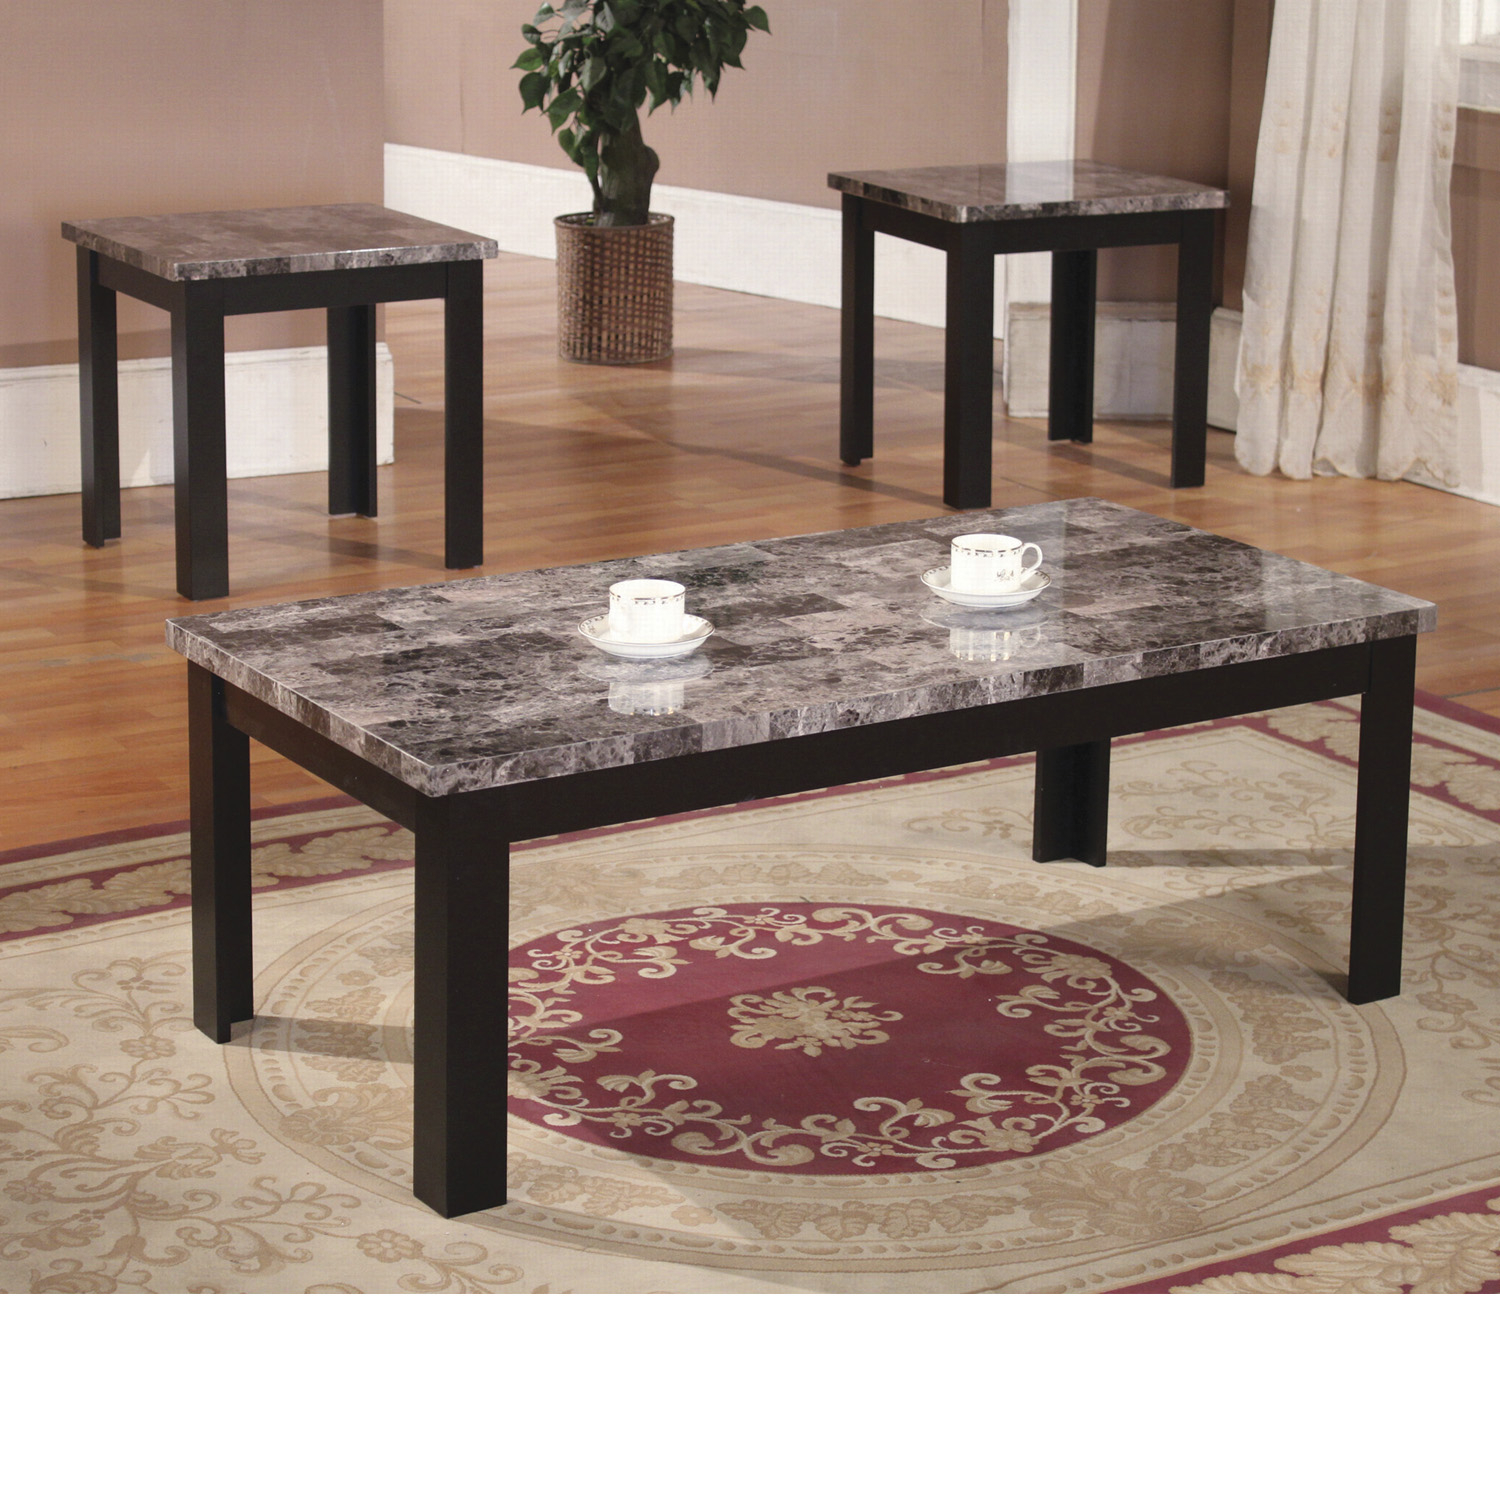 Home Source Black Marble Coffee Table Set Walmart throughout measurements 1500 X 1500